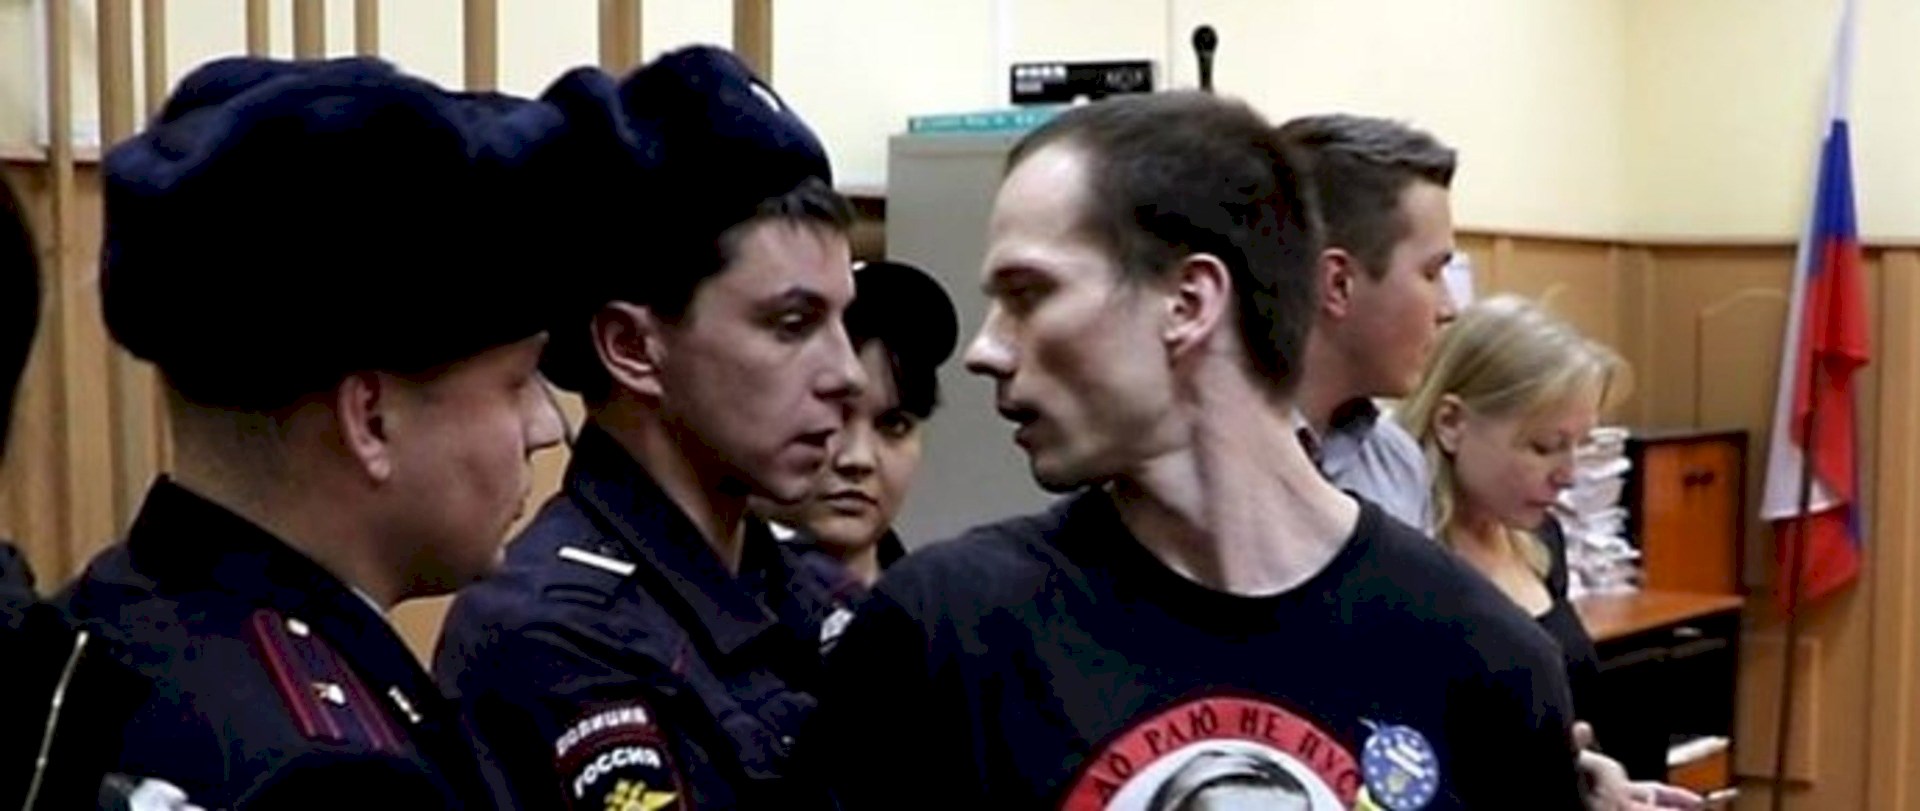 Ildar Dadin being brought into police precinct after one of his single-person protests (Image: social media)